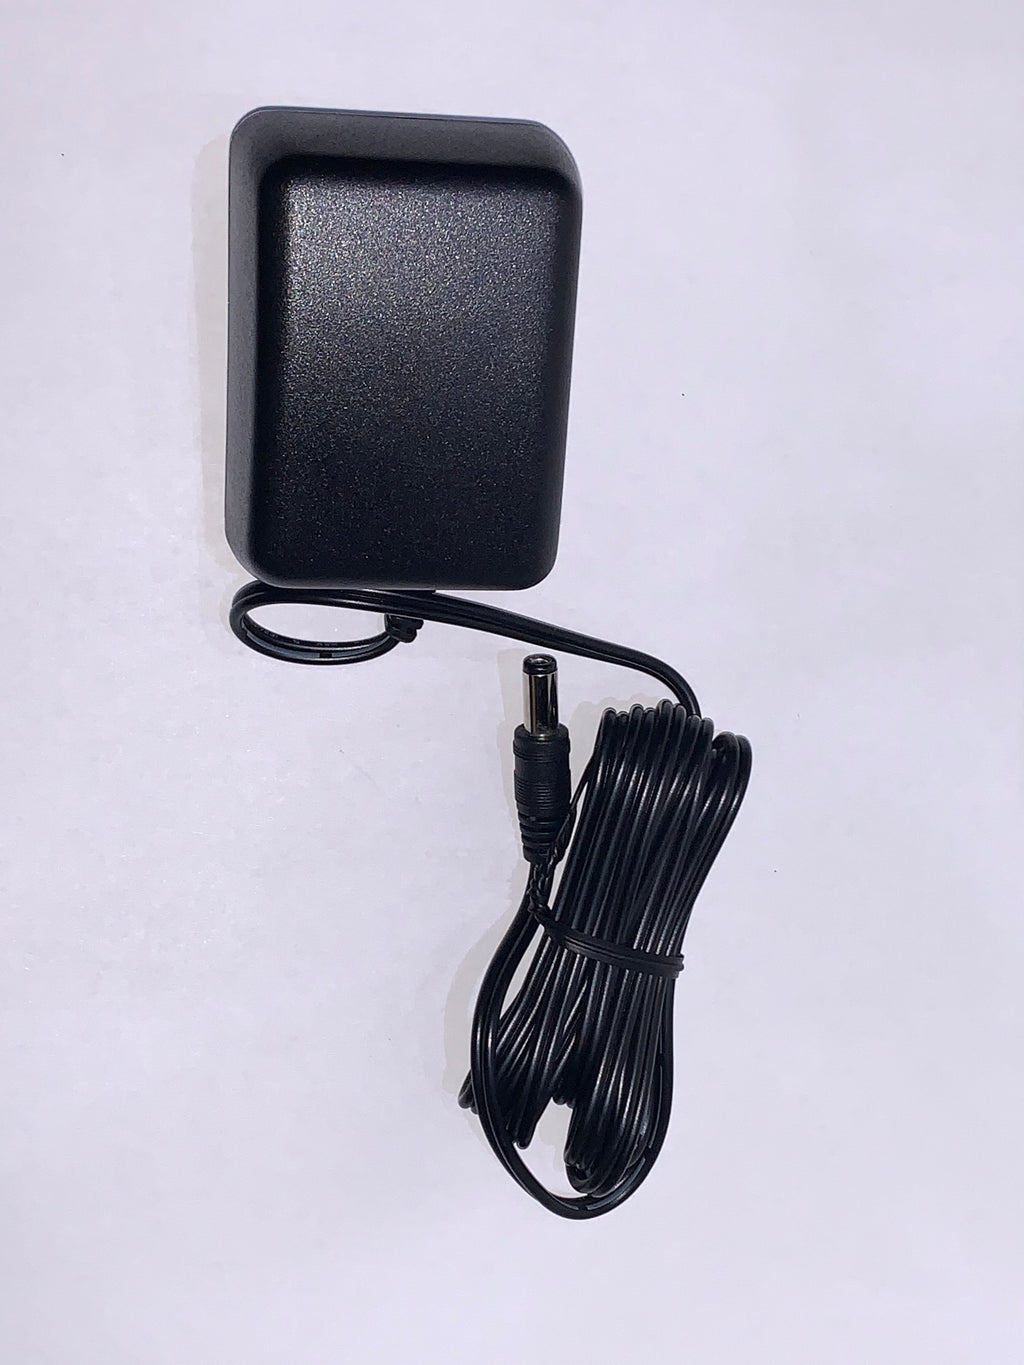 Power Supply for Decade MS-100 Transmitter